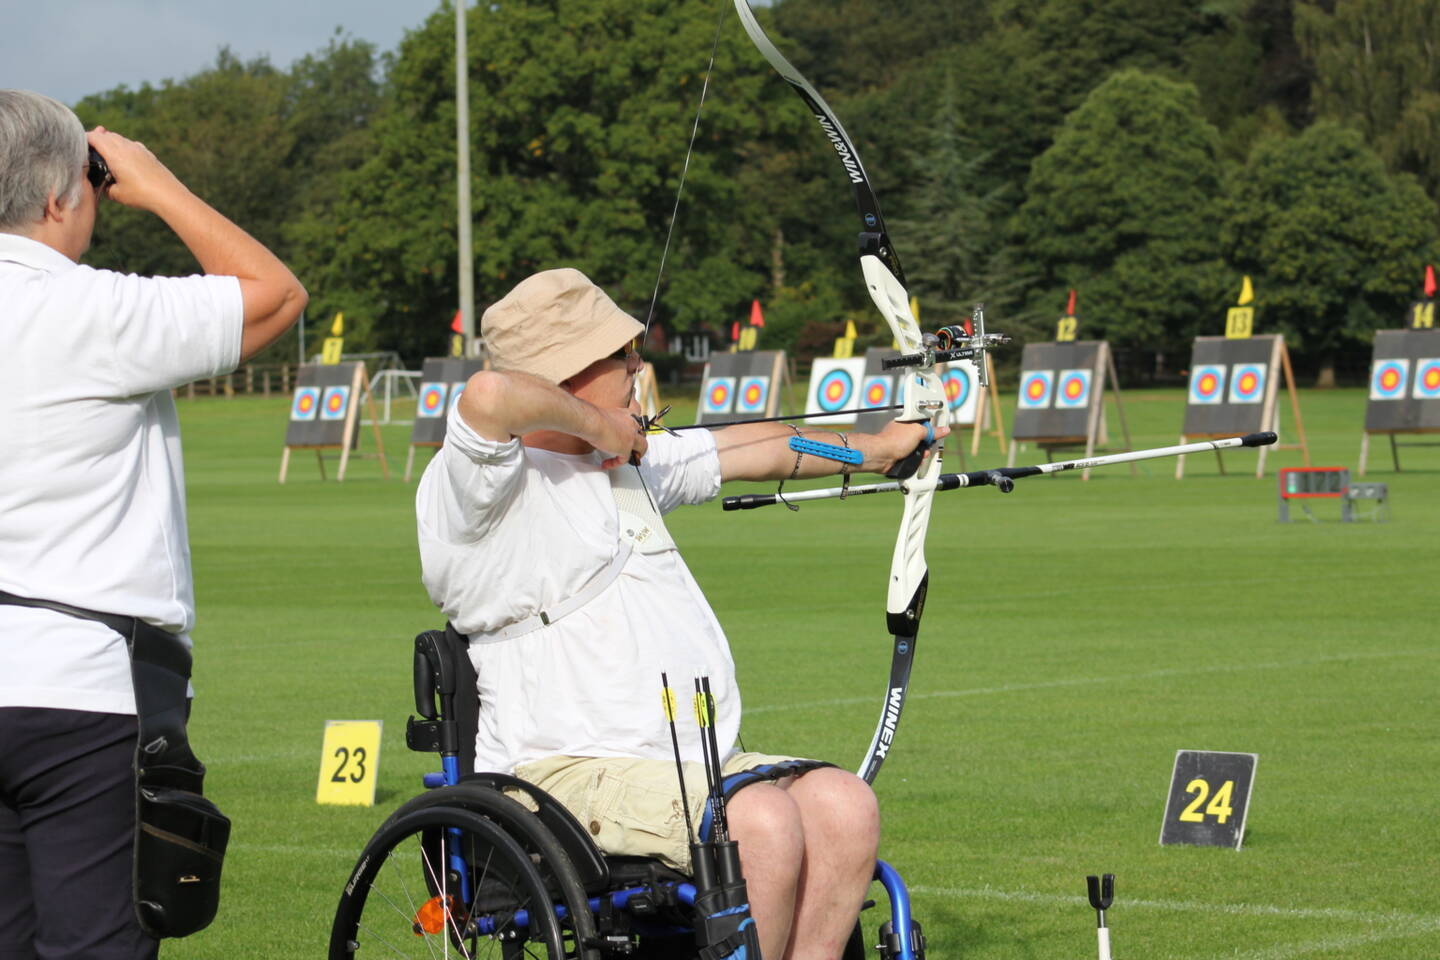 Partially sighted person taking part in archery 